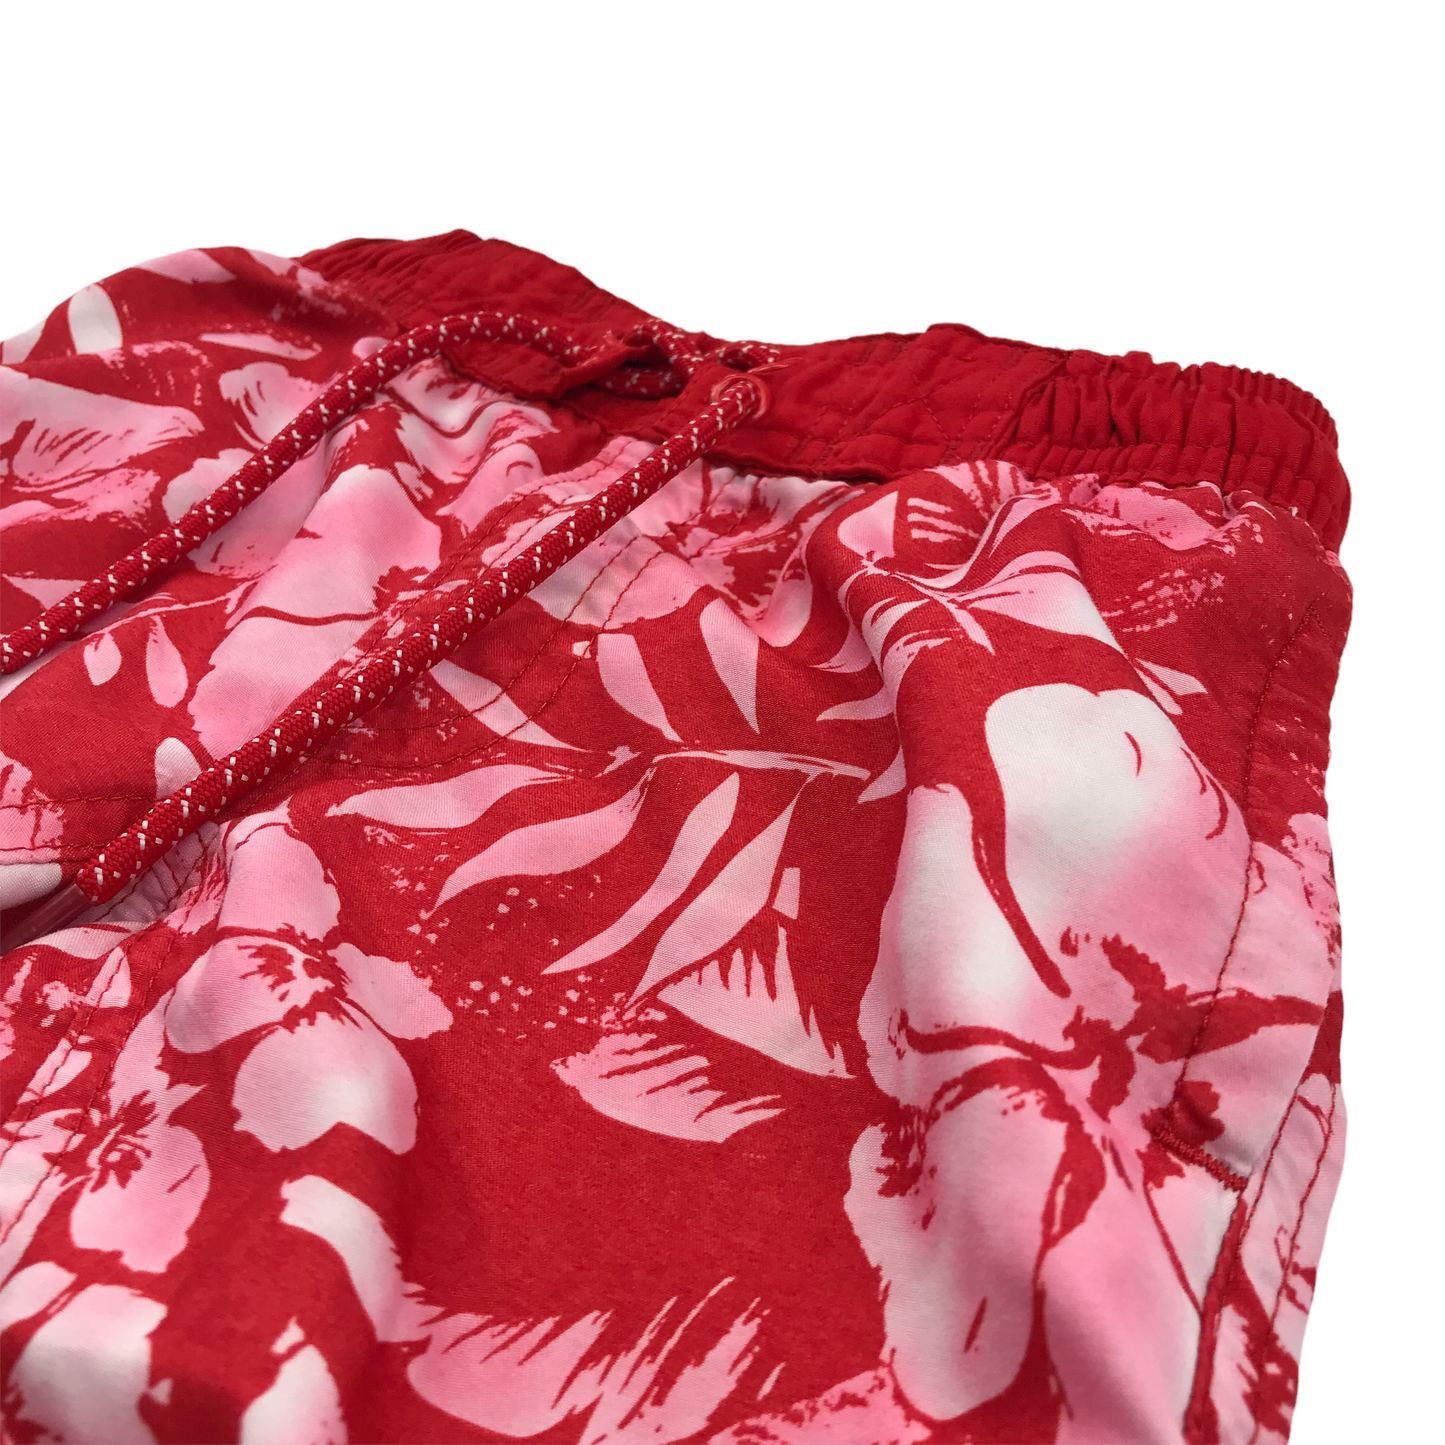 M&S Red Floral Swim Trunks Age 4